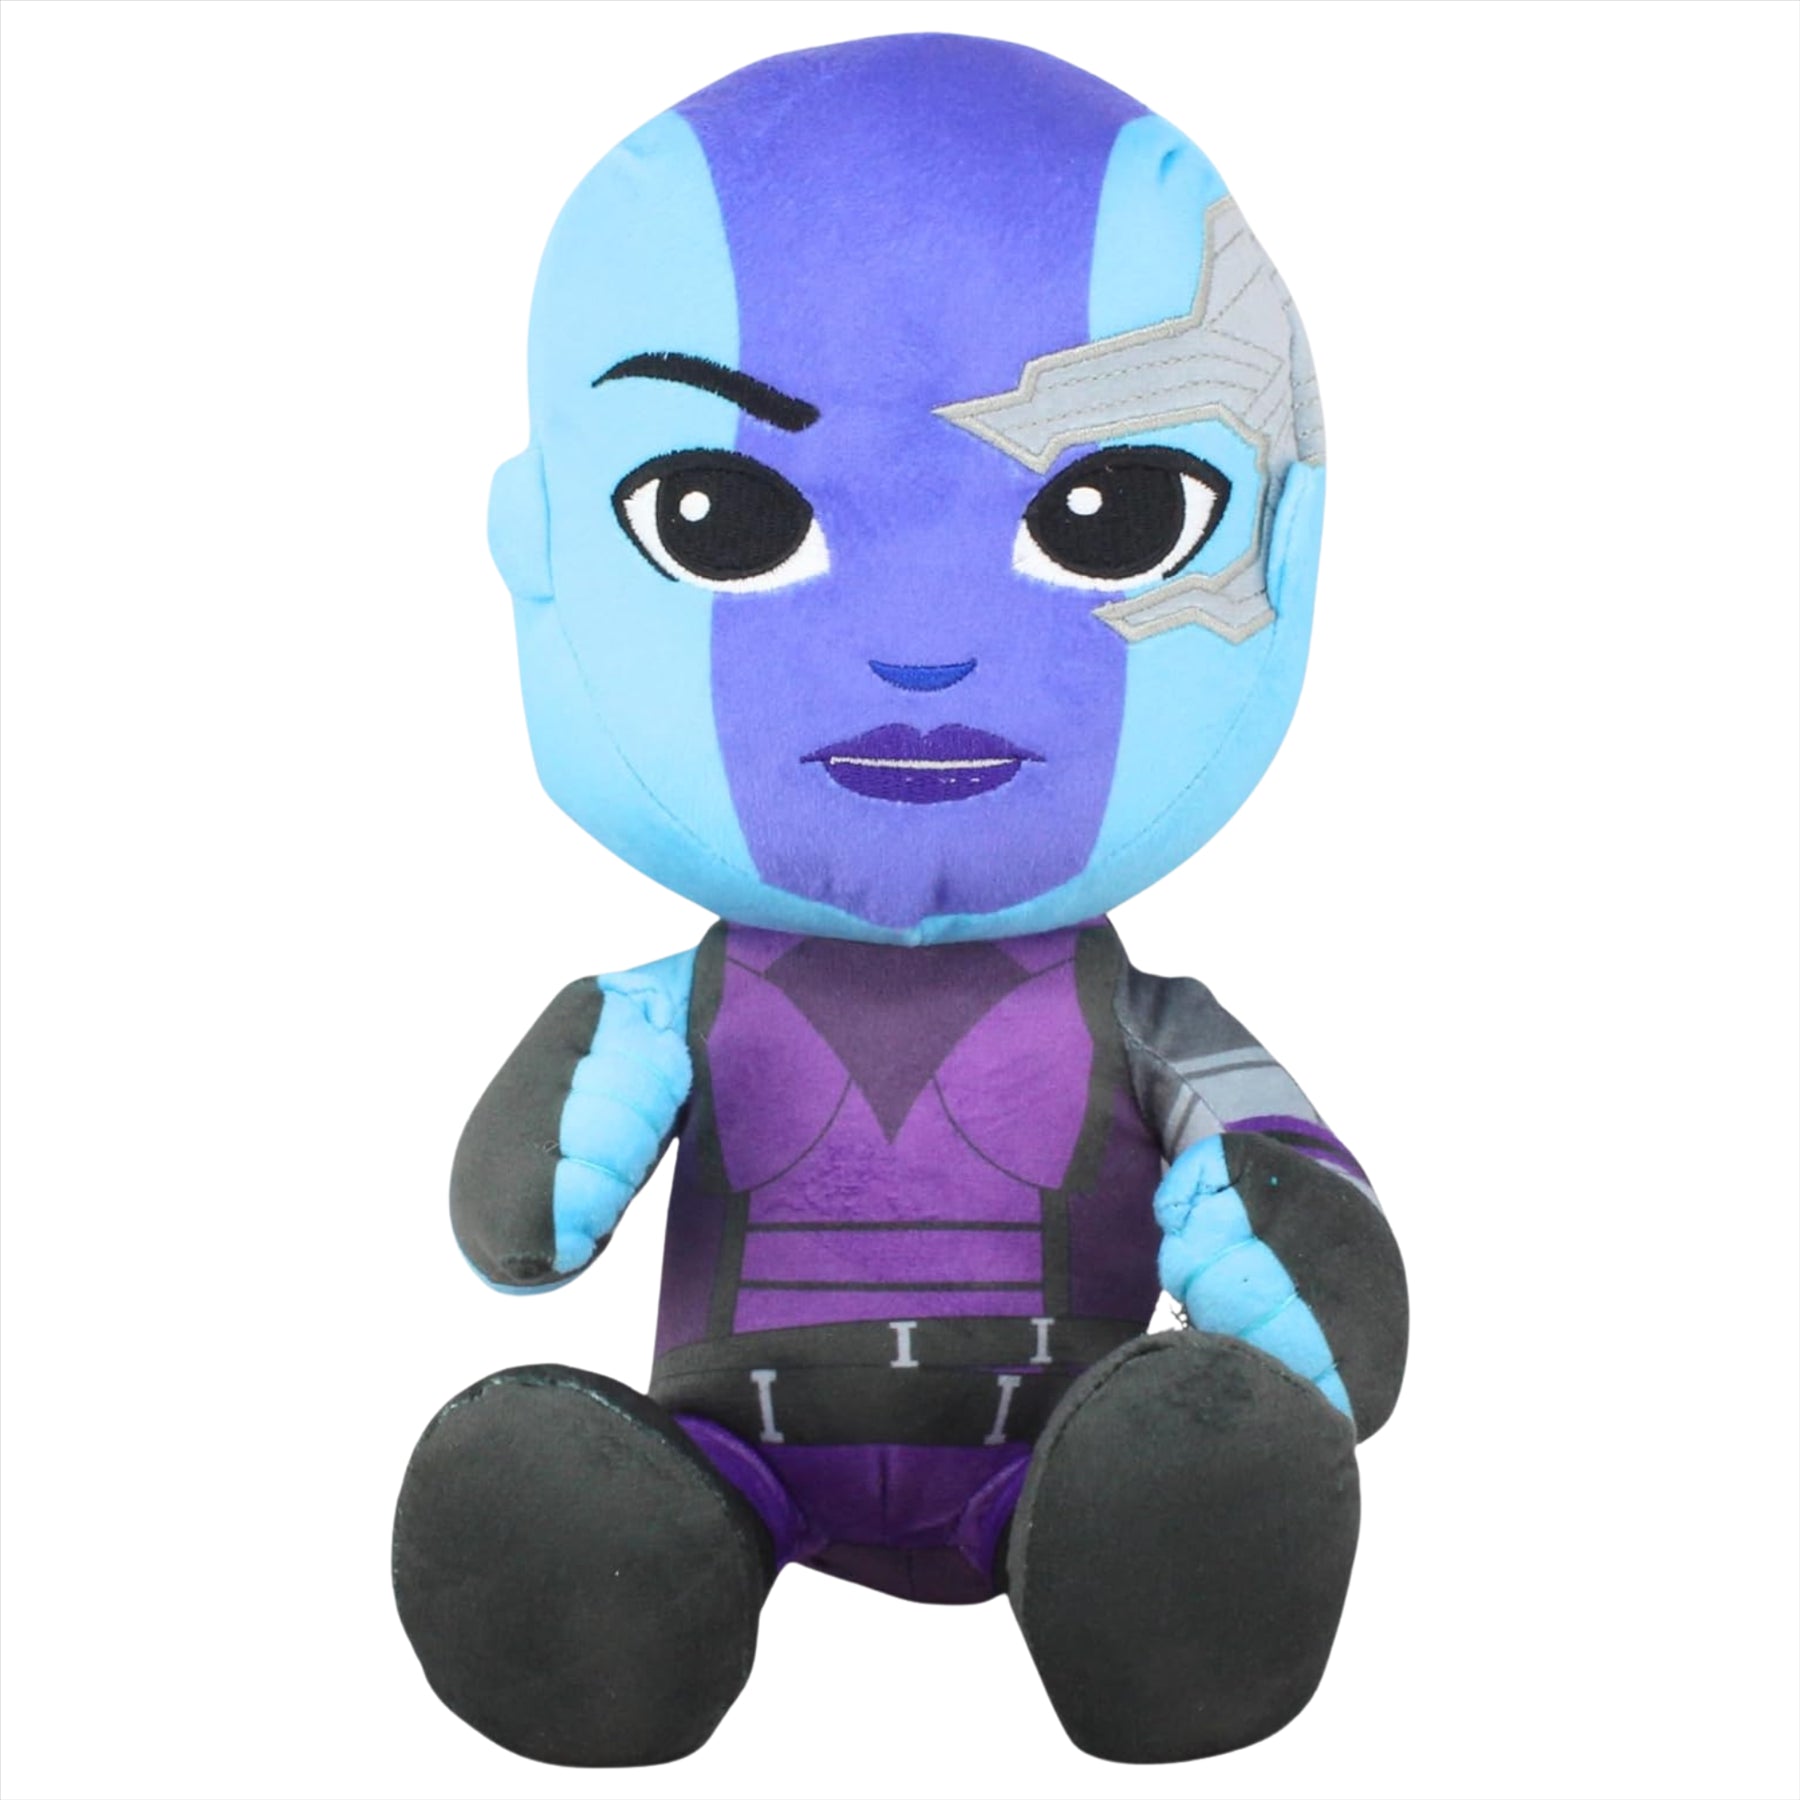 Guardians of the Galaxy Avengers Nebula Super Soft Embroidered 36cm Plush Toy